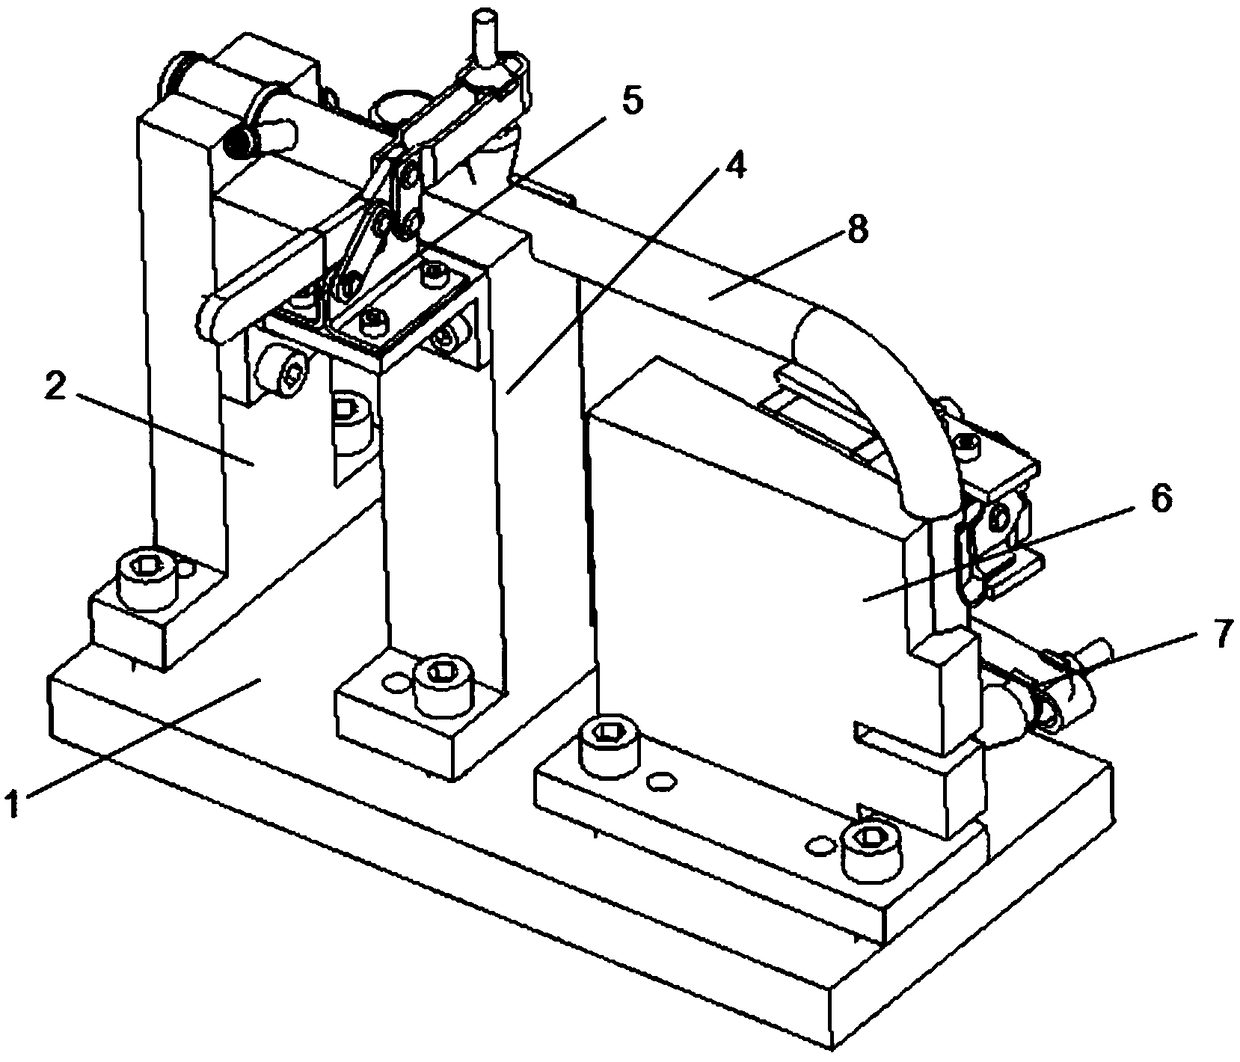 An elbow welding positioning and locking device